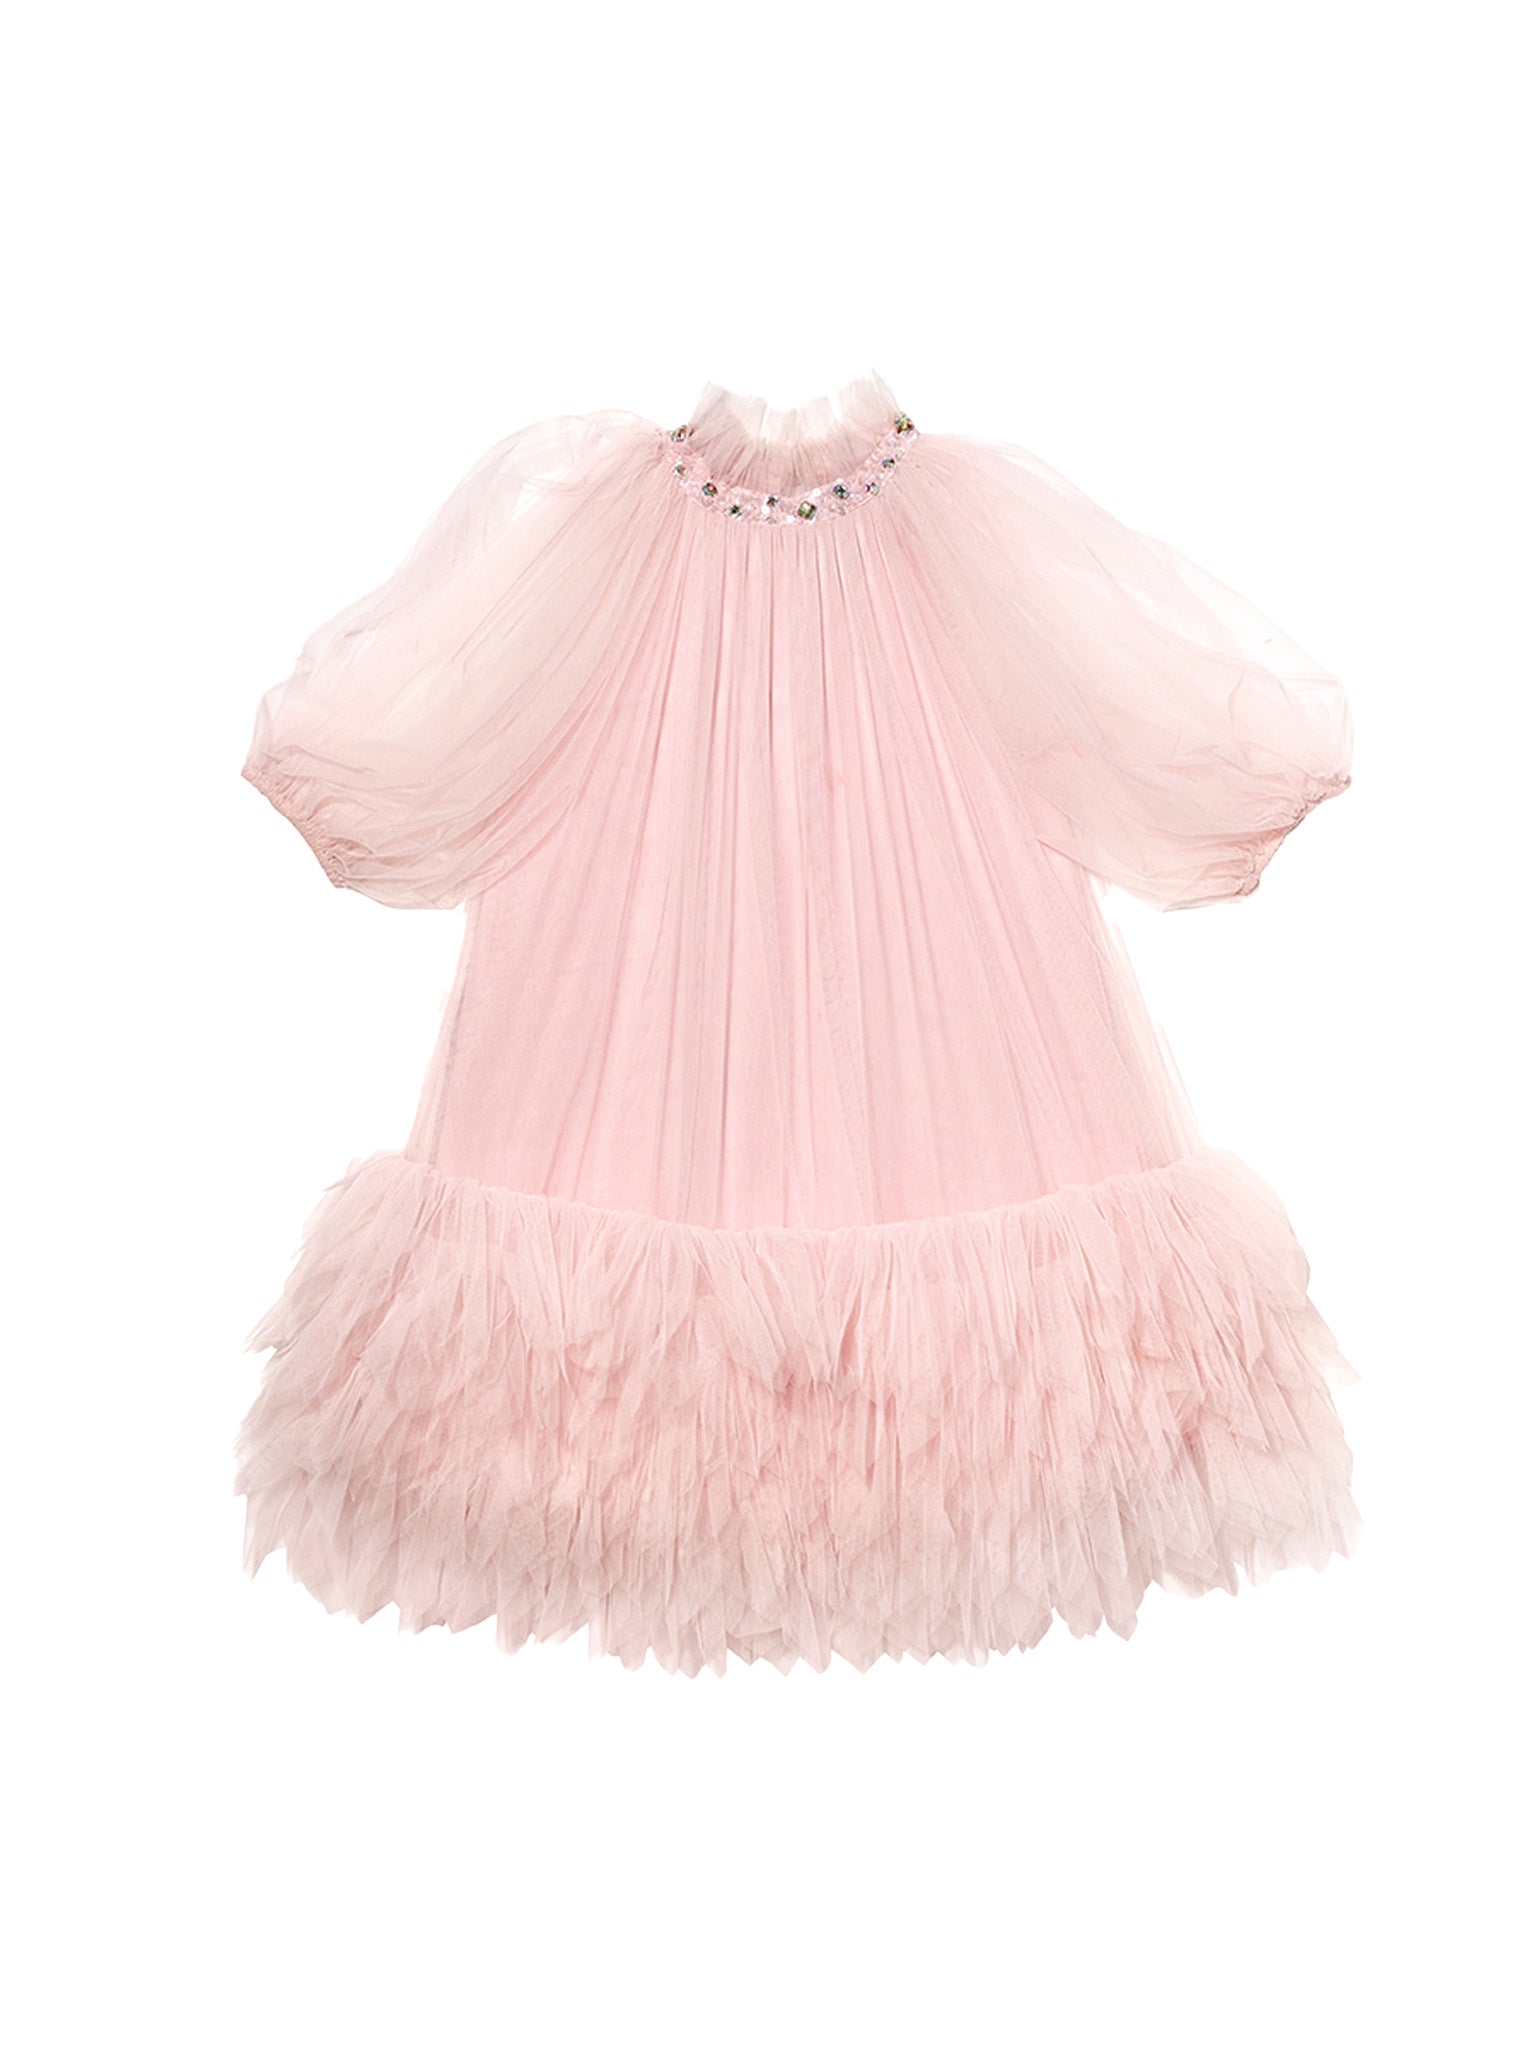 OUTRE TULLE DRESS - PINK LIFE